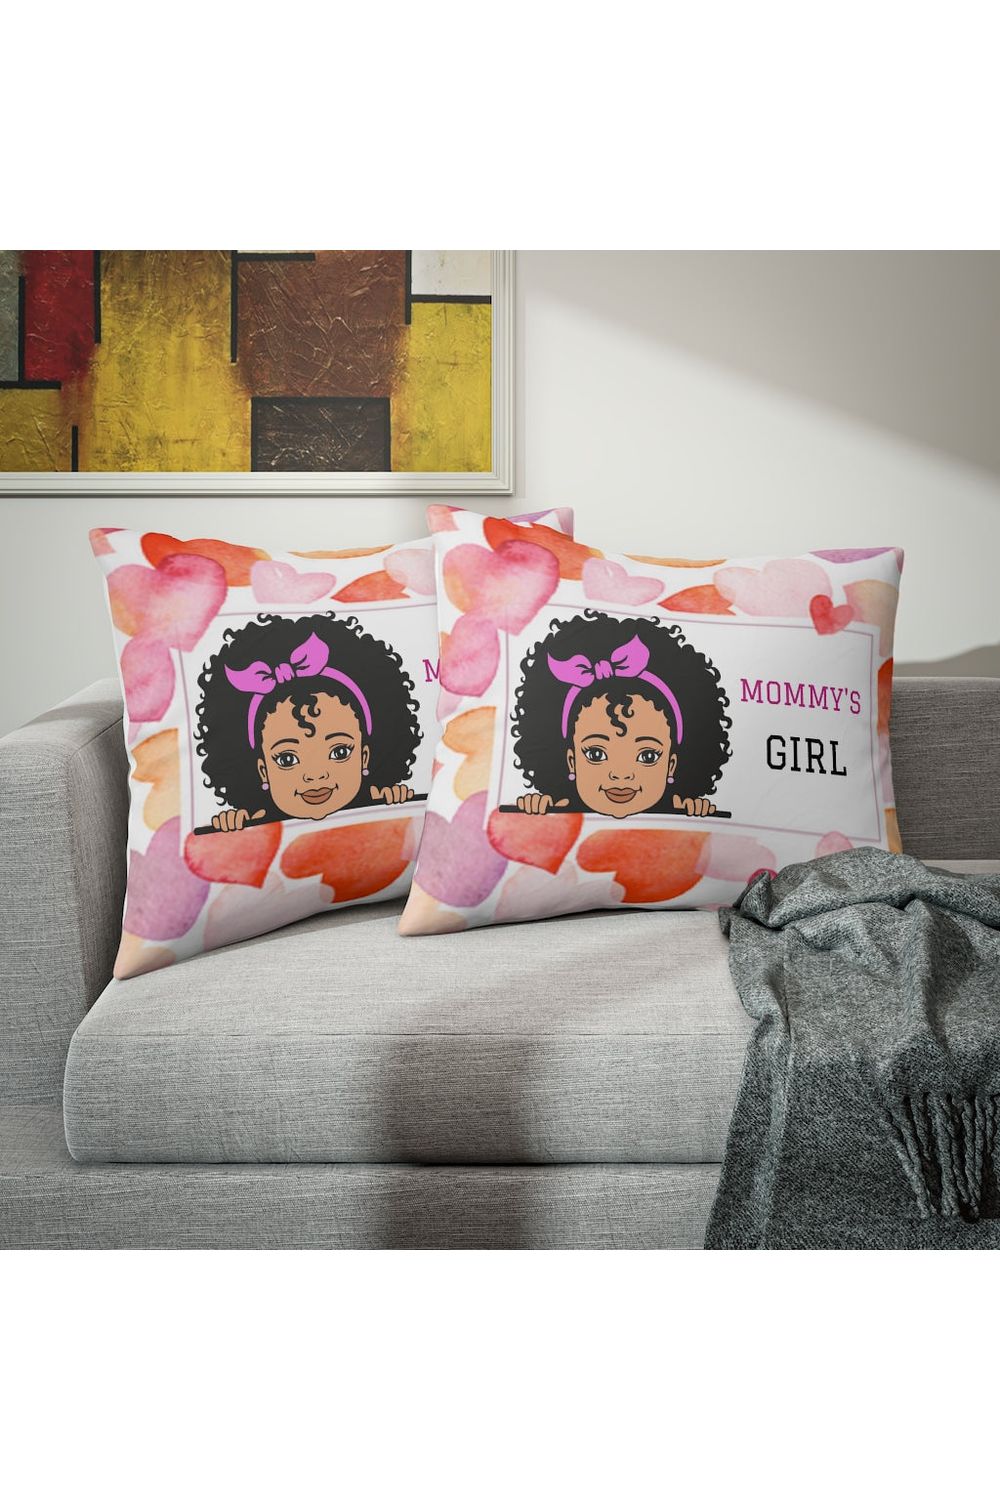 Mommy's Girl One Pillow Sham - NicholesGifts